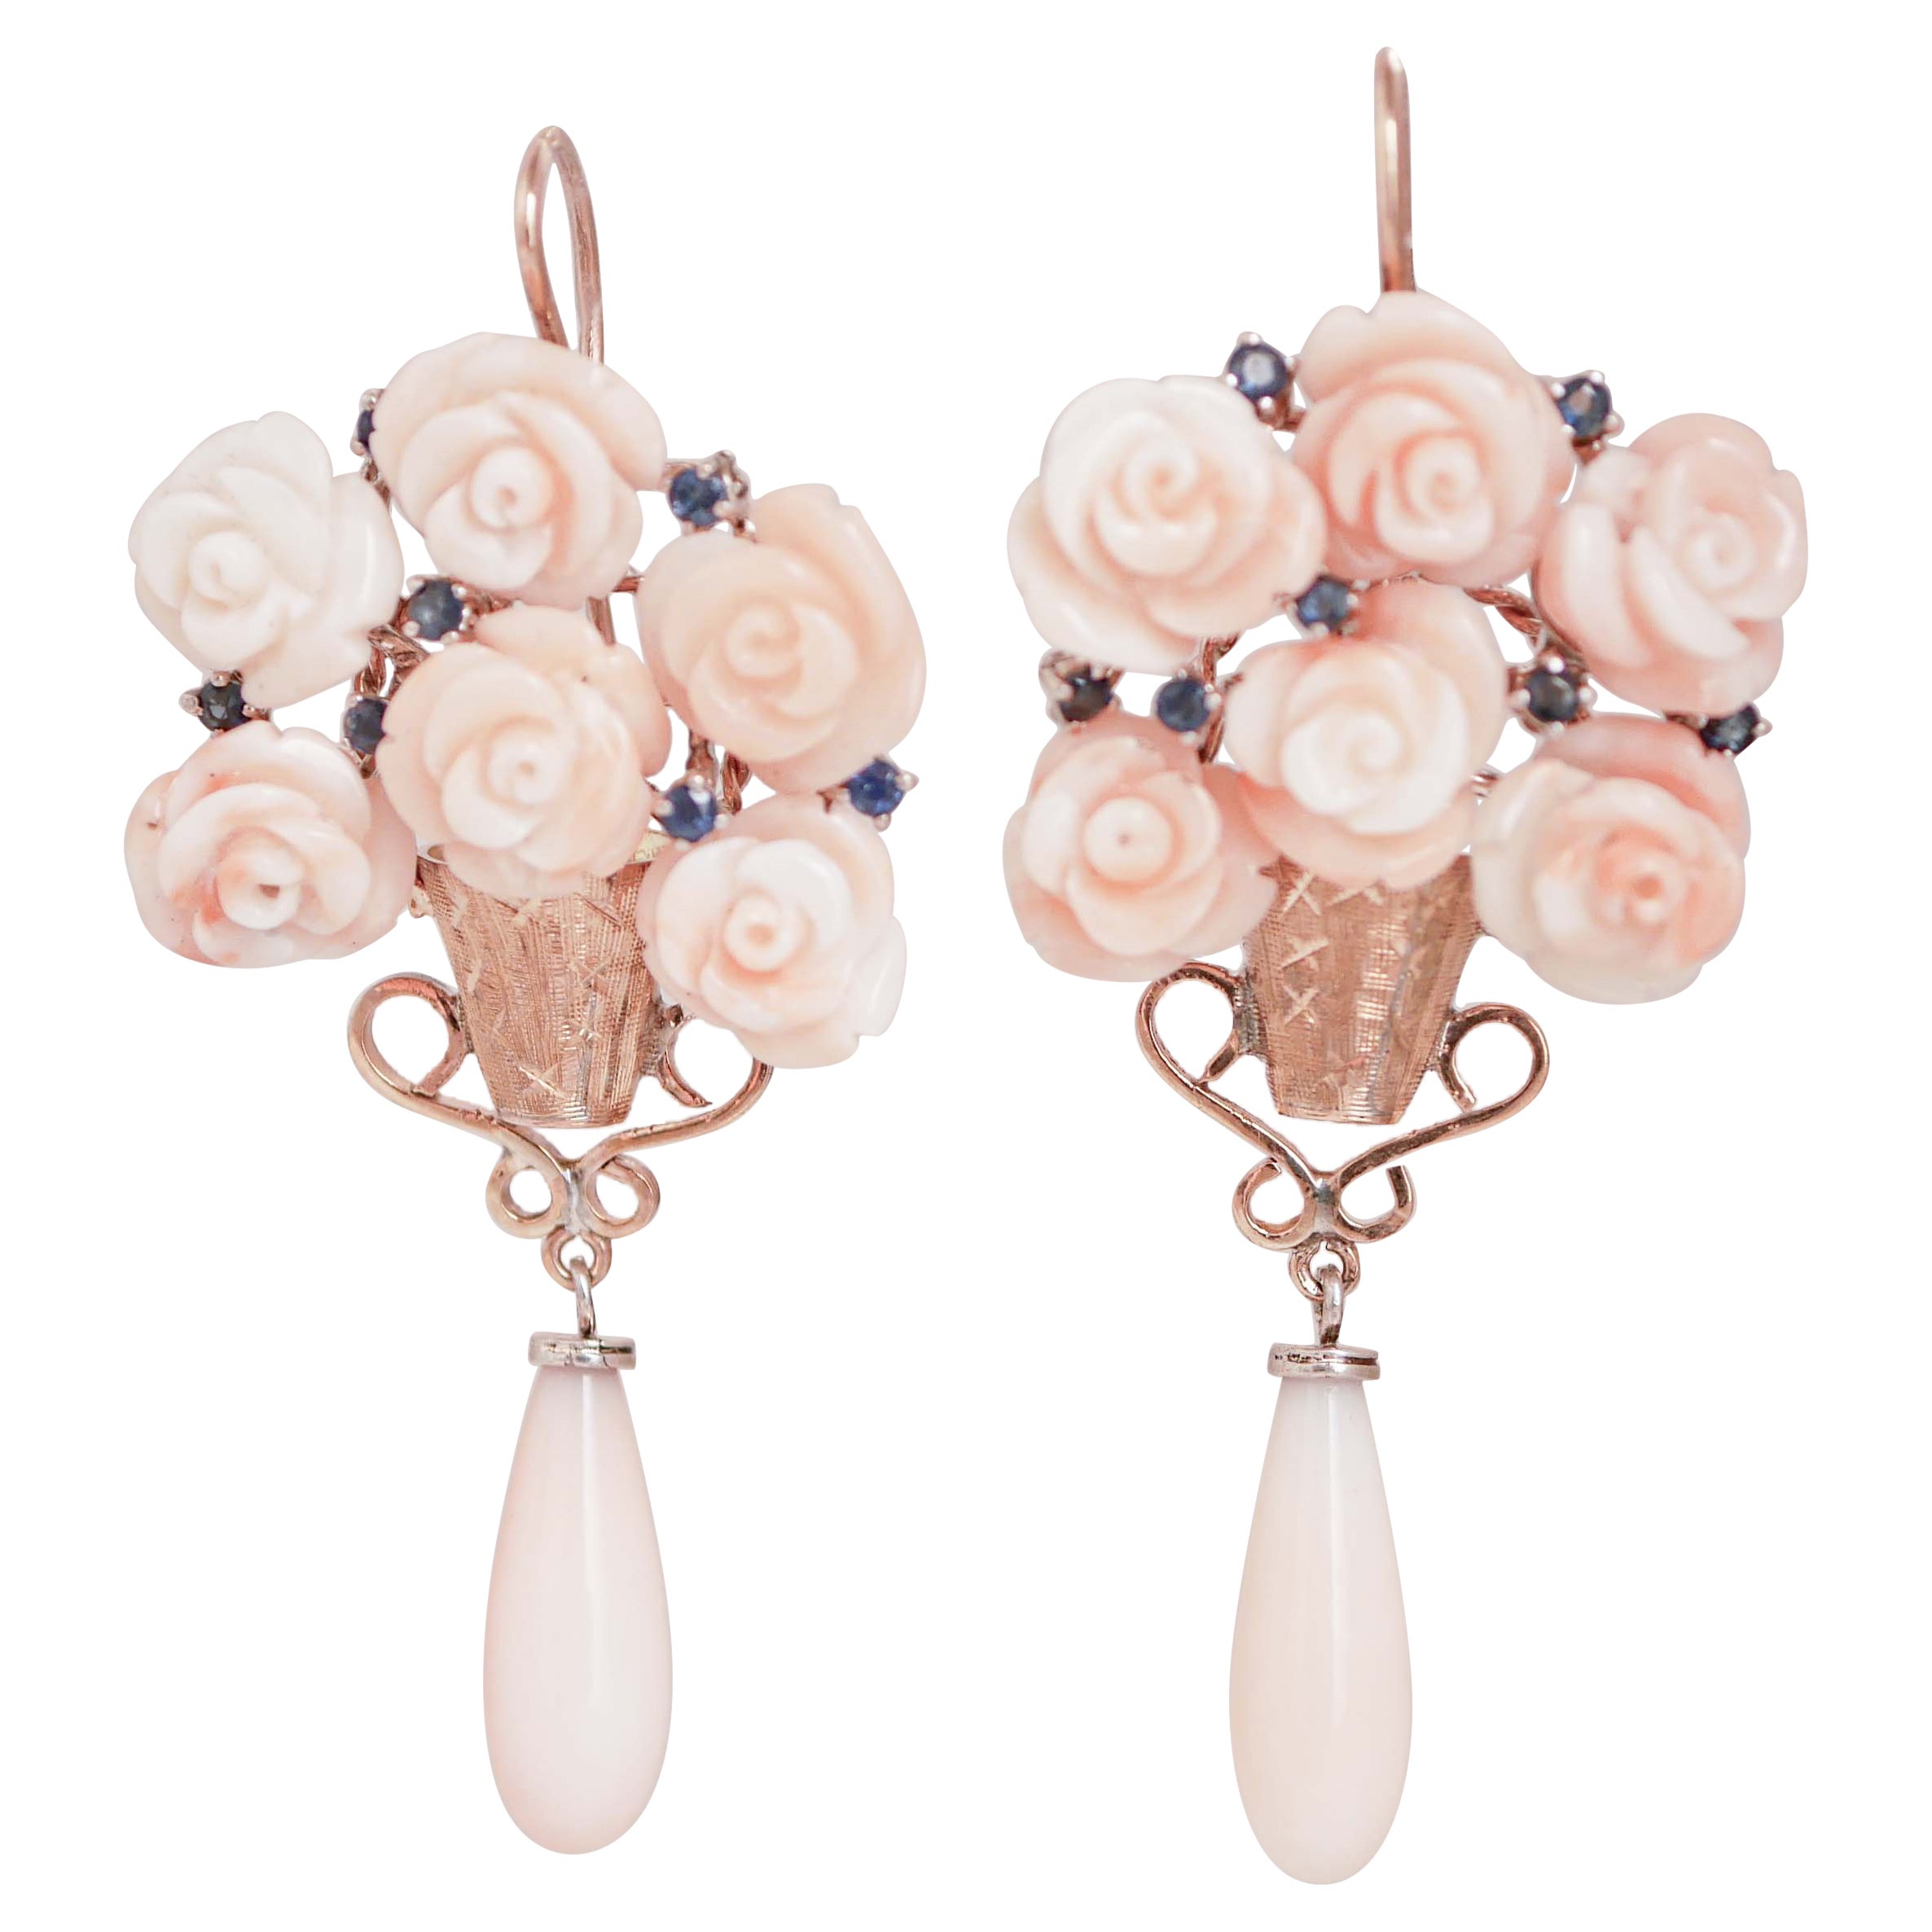 Coral, Sapphires, Rose Gold and Silver Retrò Earrings.